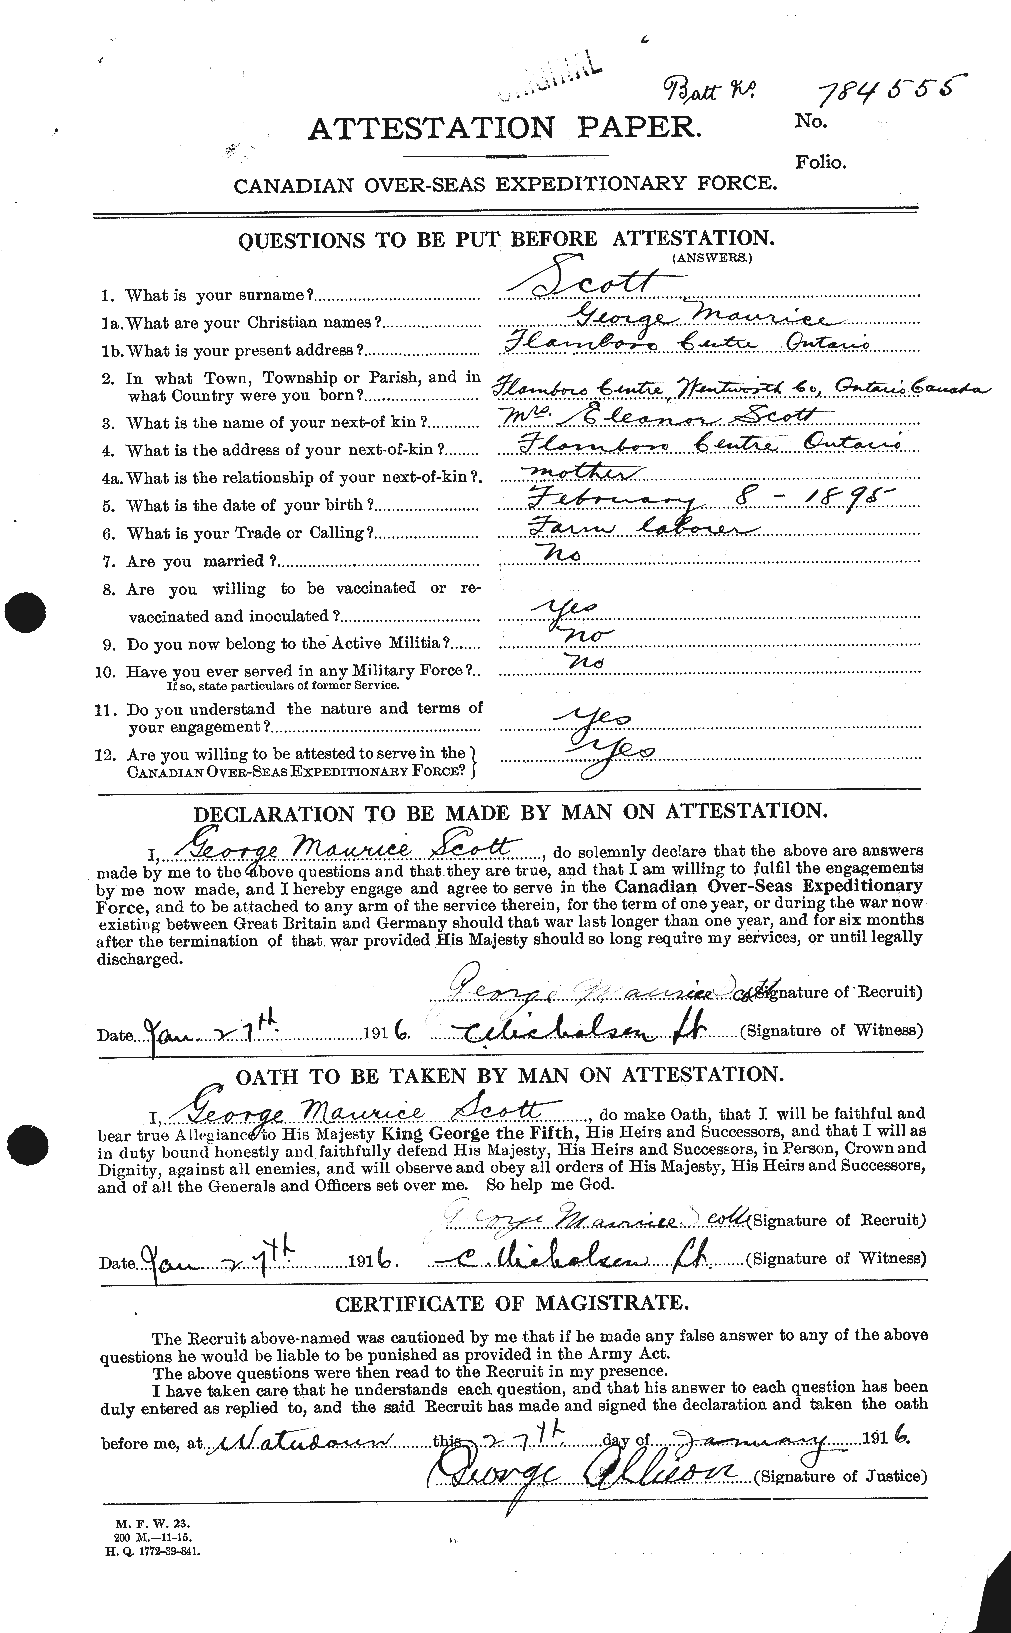 Personnel Records of the First World War - CEF 083544a